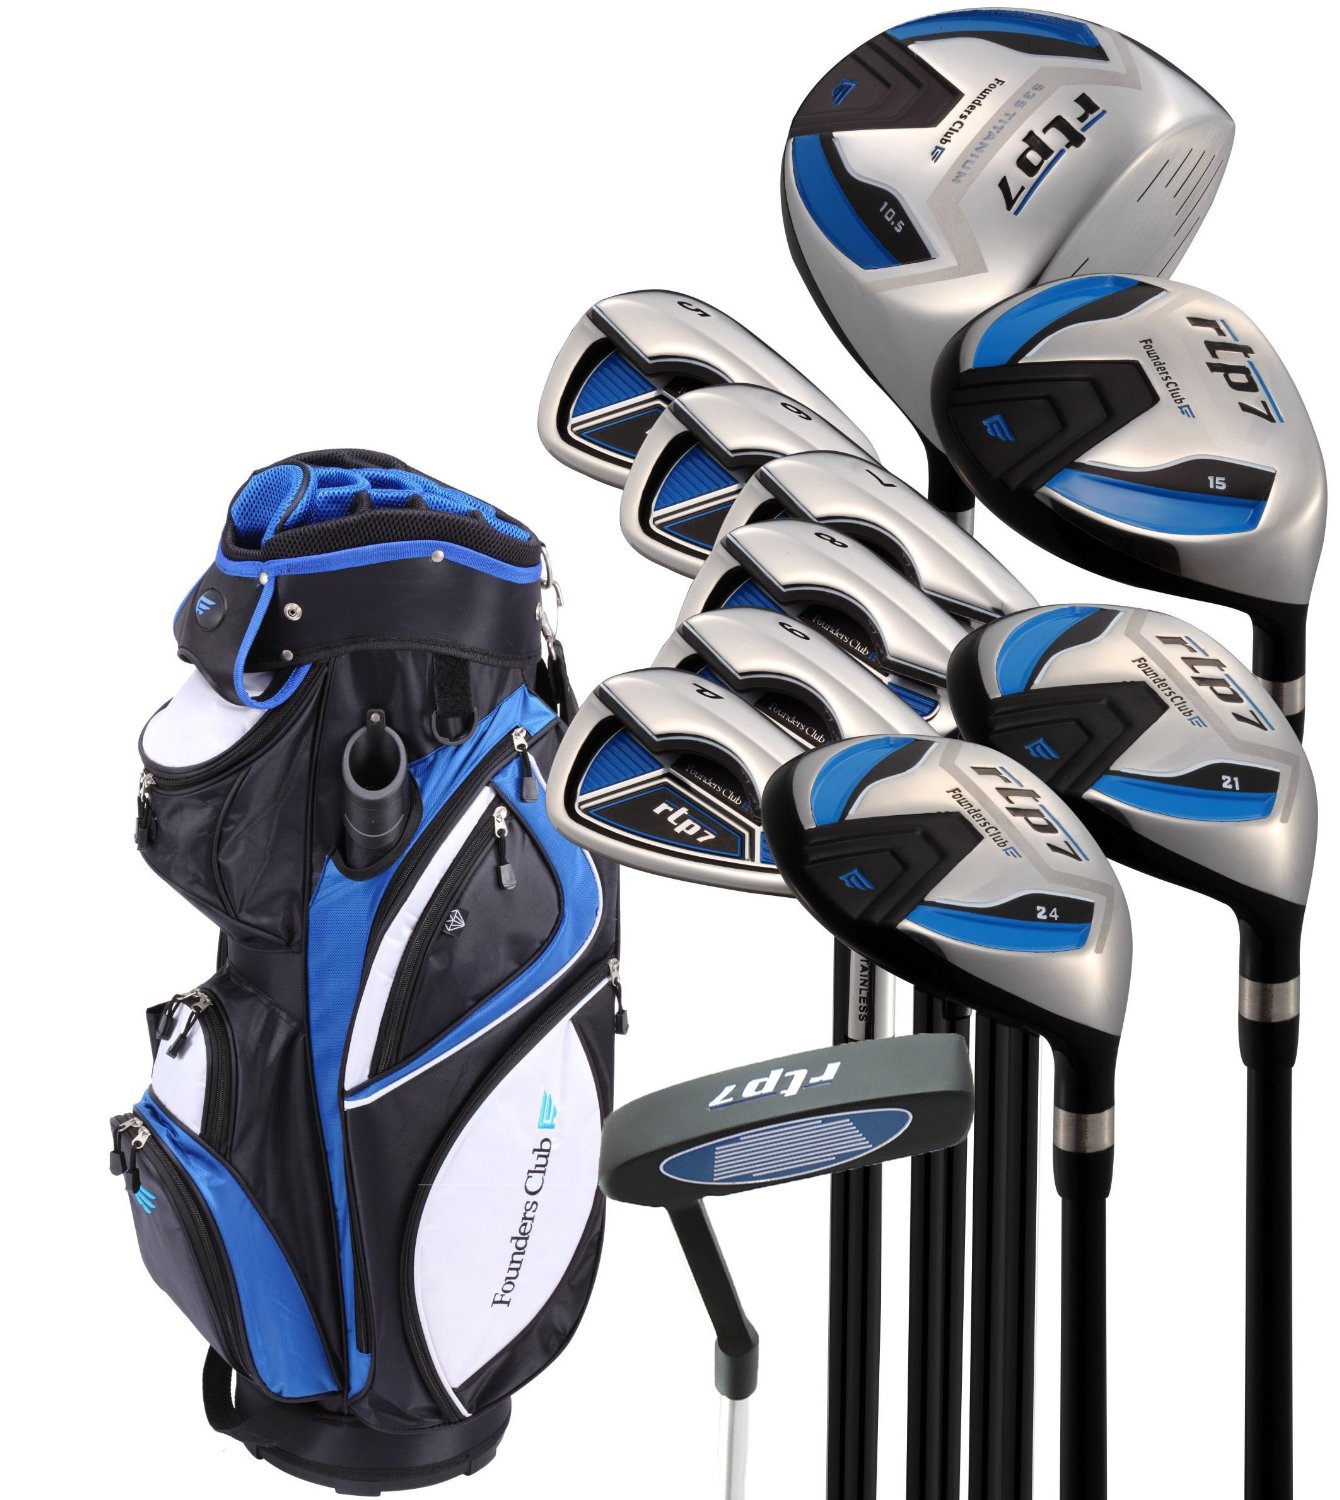 Top 104+ Pictures Best Car For 4 Sets Of Golf Clubs Latest